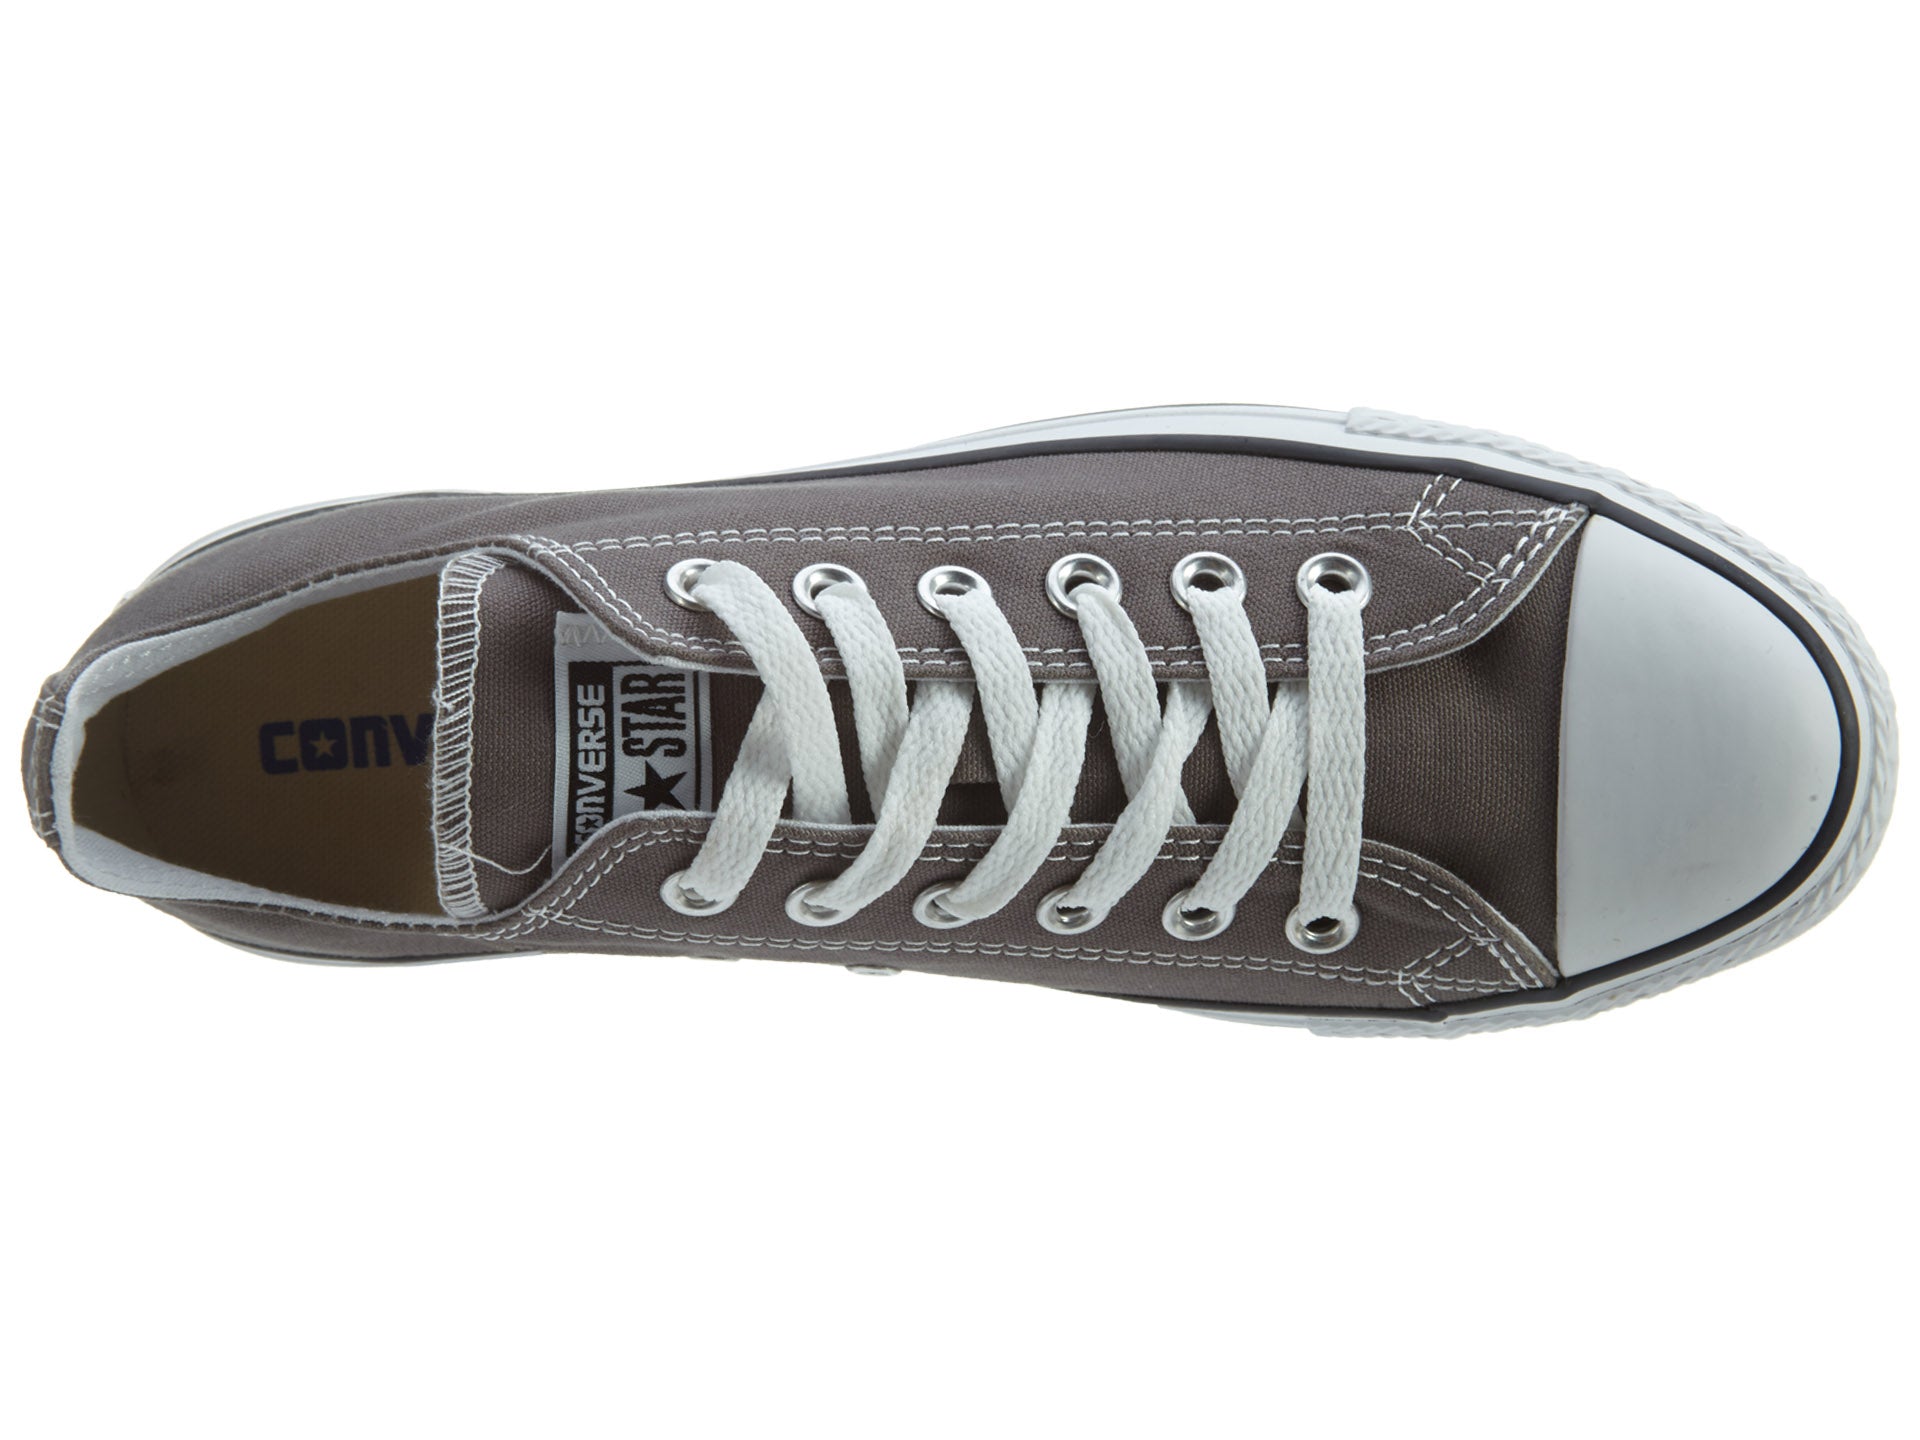 Converse Chuck Taylor All Stars Ox Shoe - Charcoal